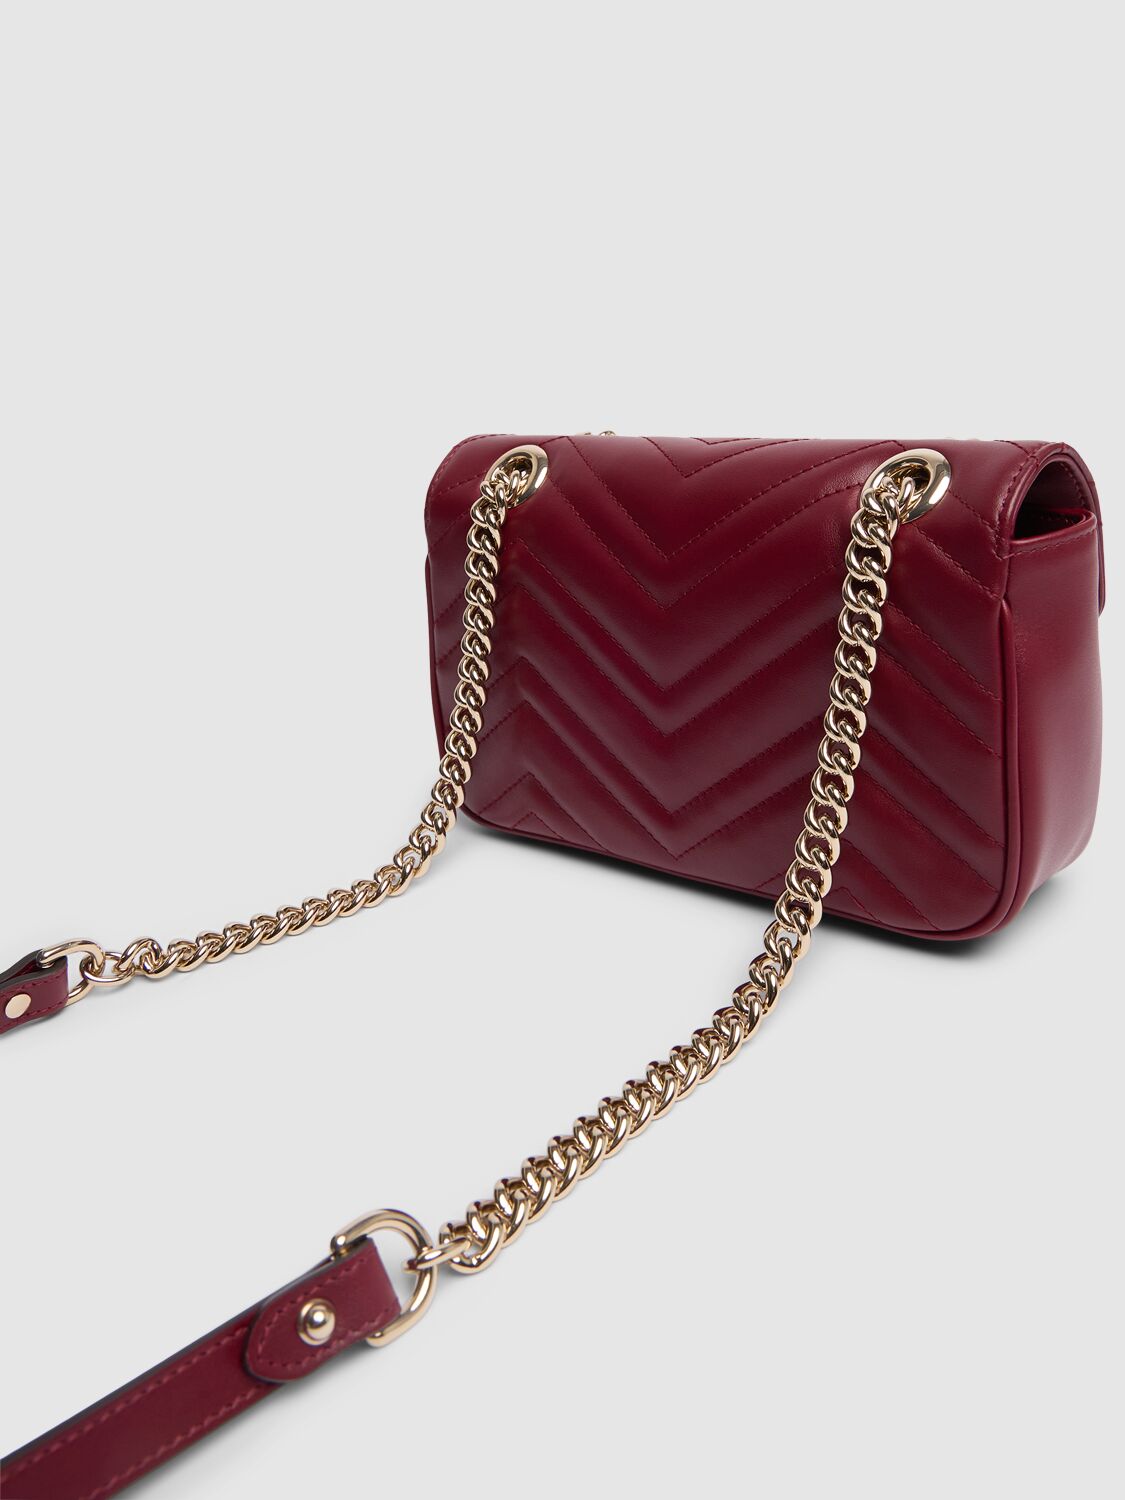 Shop Gucci Gg Marmont Leather Shoulder Bag In Rosso Ancora